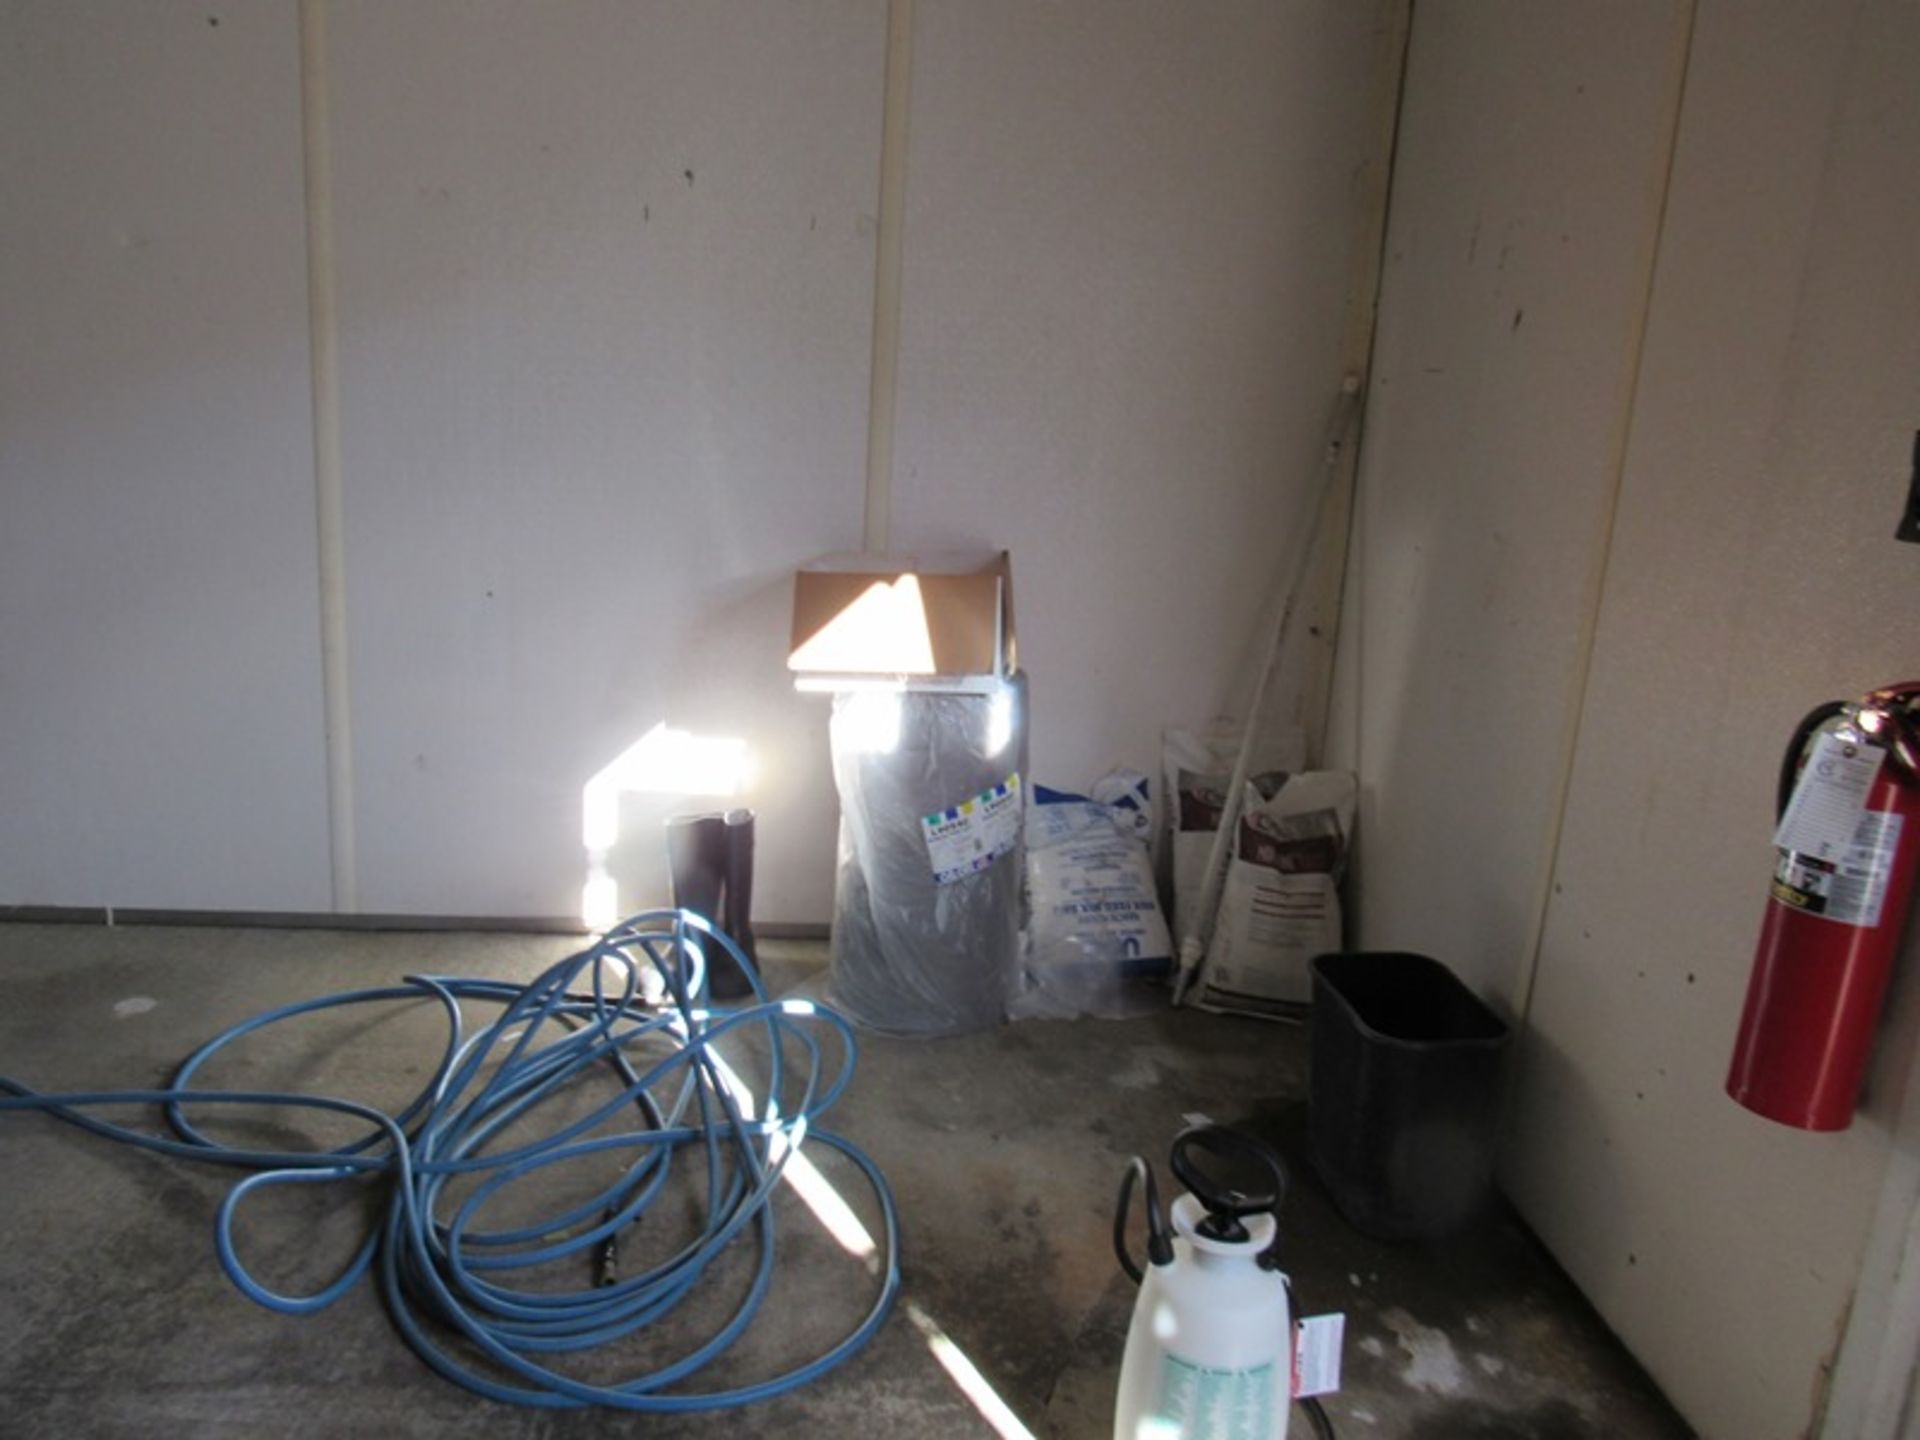 Lot Compressor Room Contents: Desk, Chairs, Hose, Sprayers, Bump Caps, Boots, Stainless Steel - Image 6 of 10